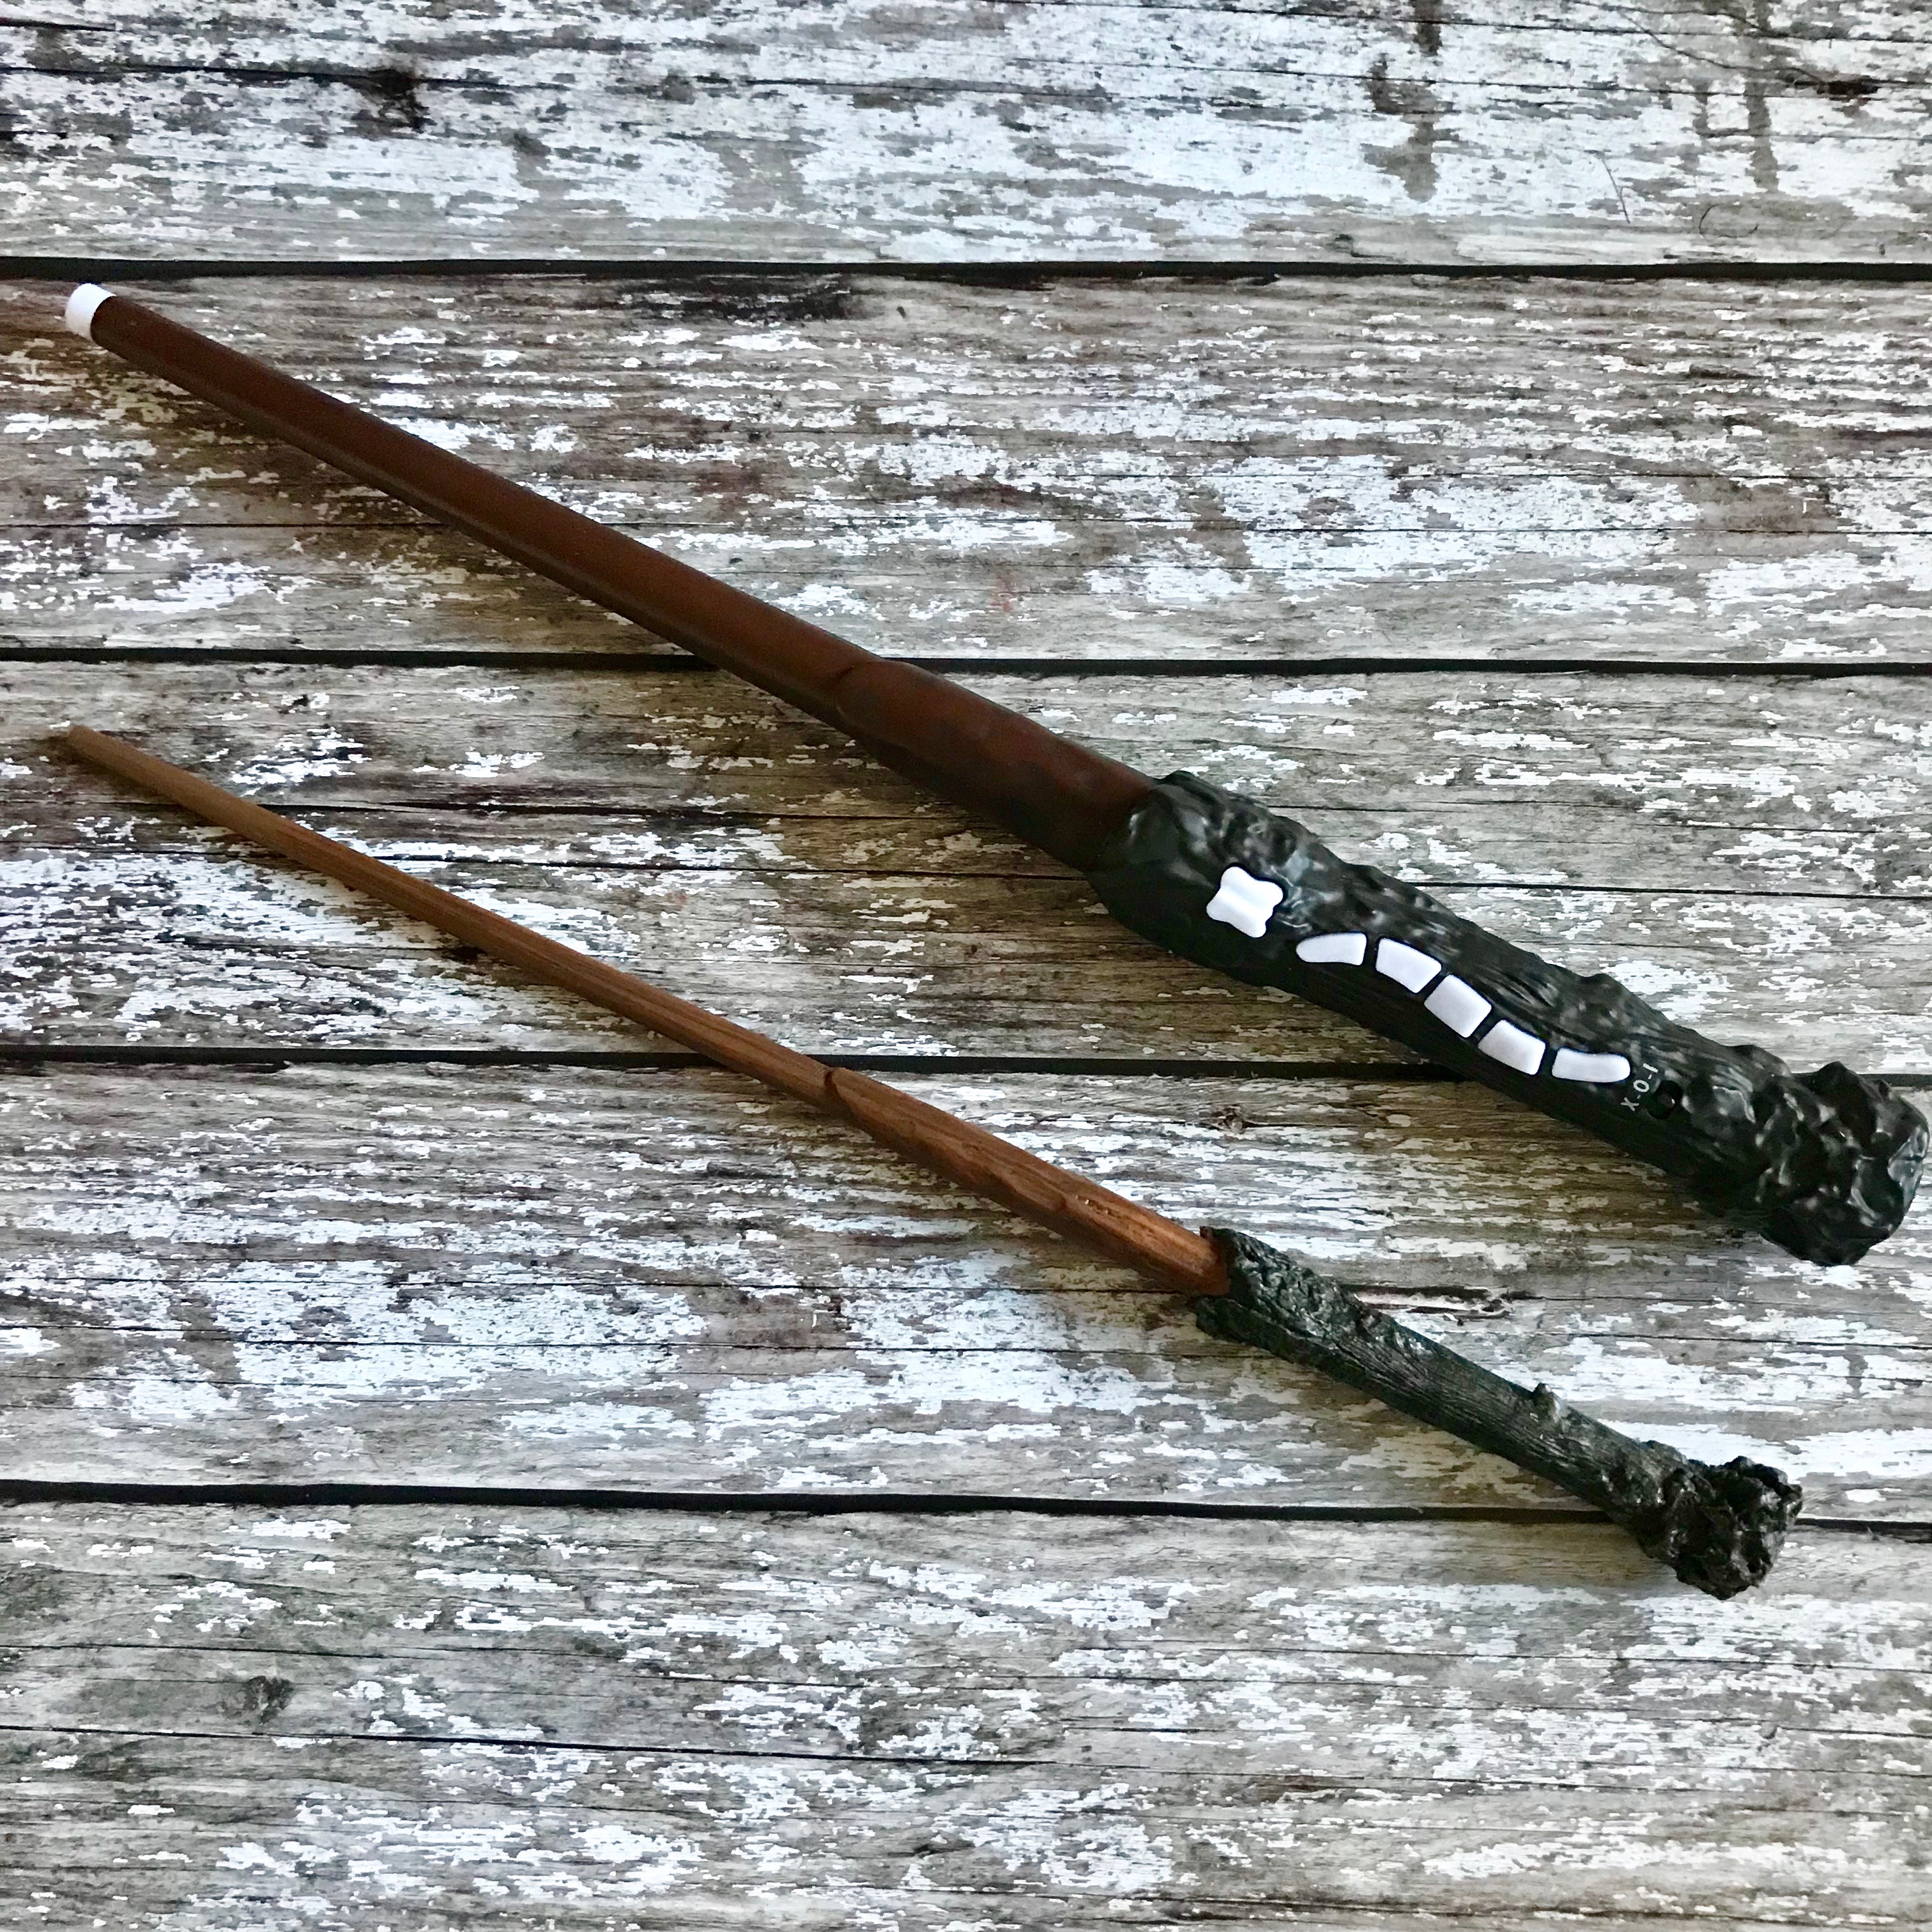 Harry Potter Training Wand compared to the Harry Potter Replica wand from the WB Studio Tour